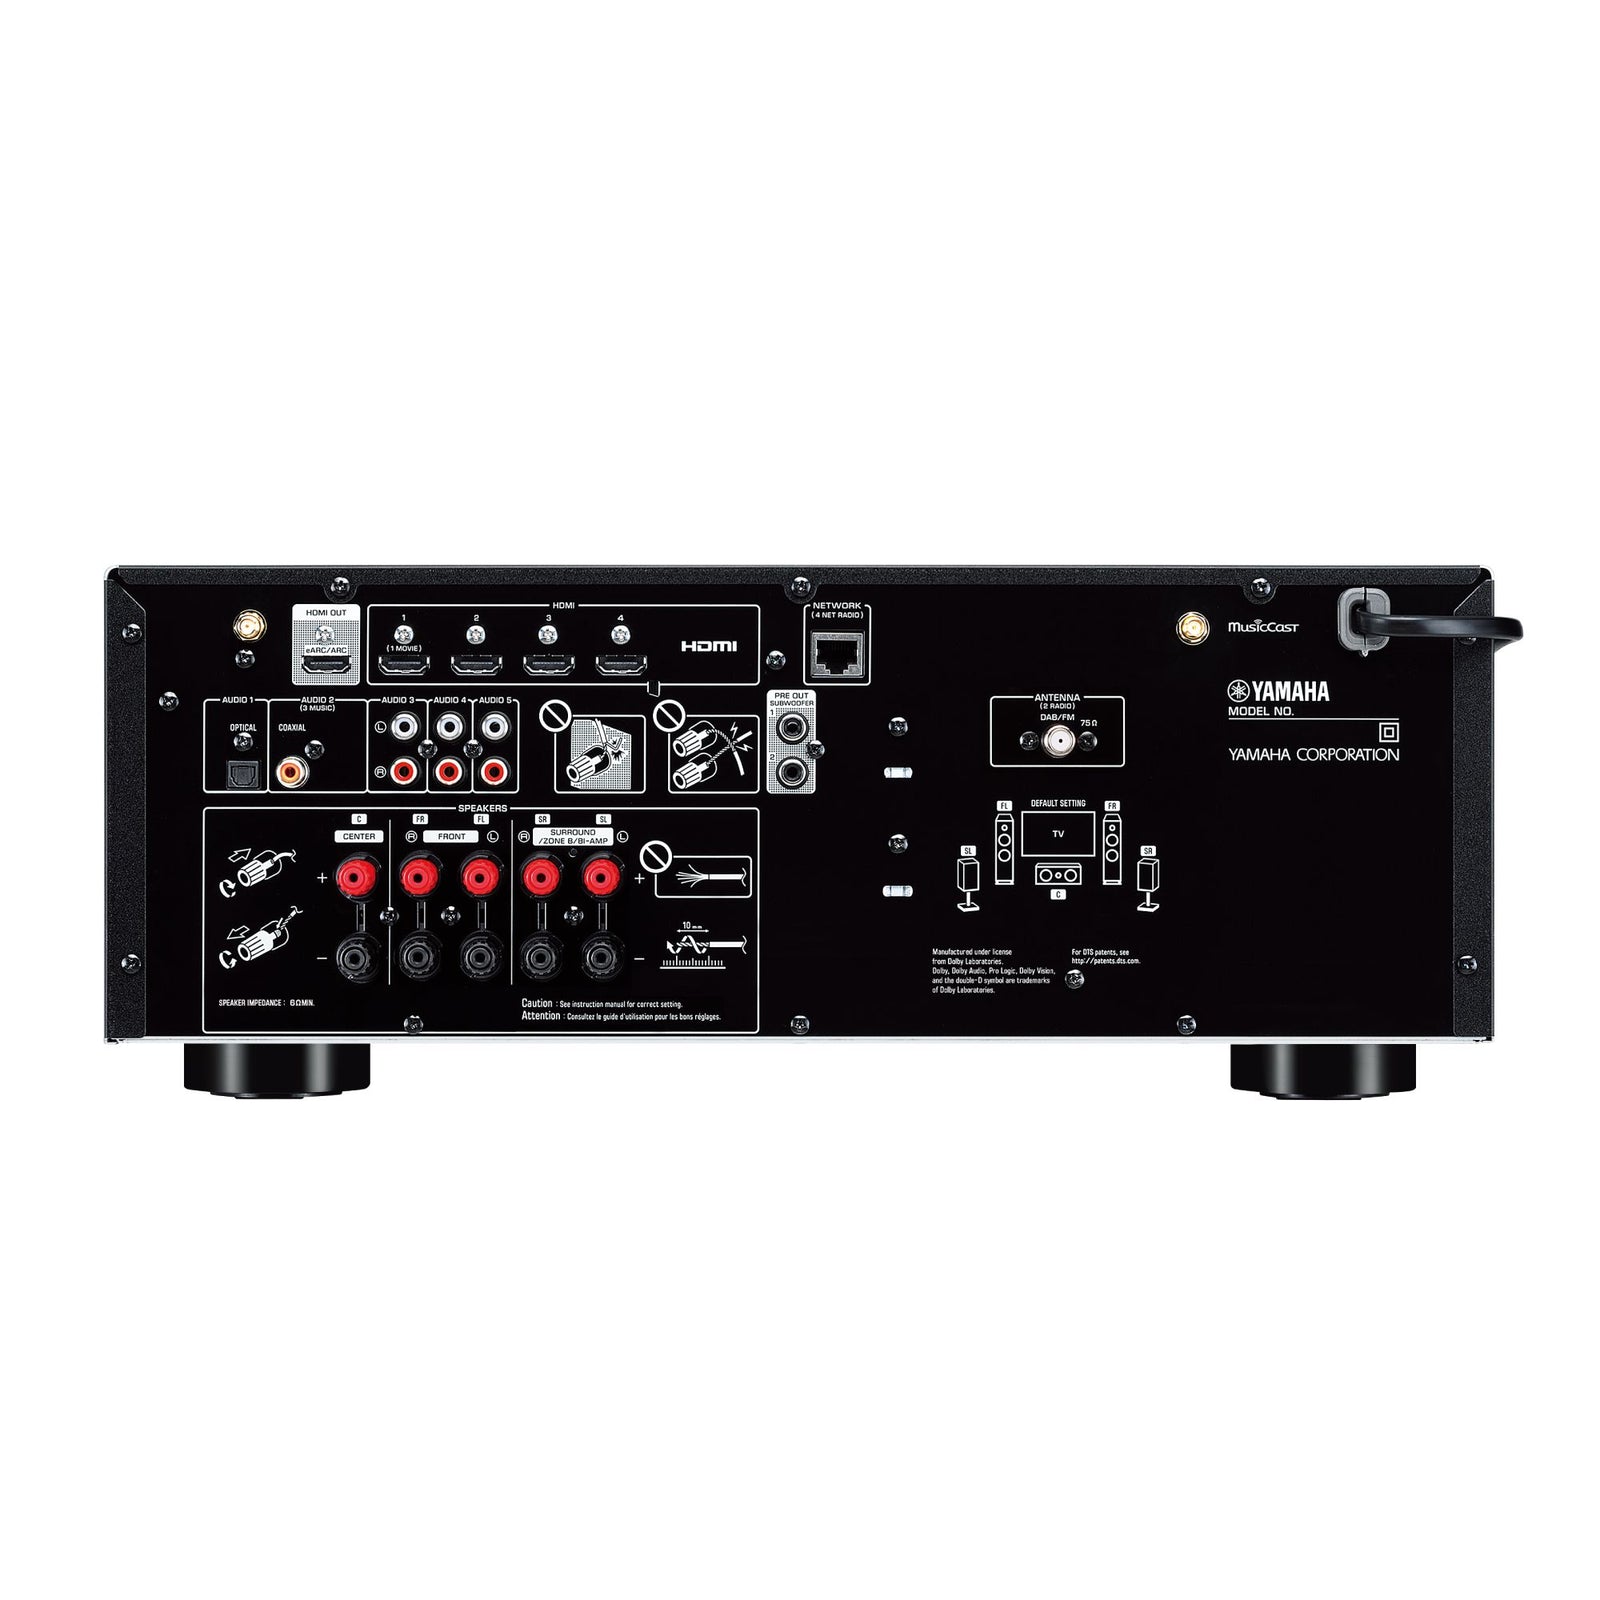 YAMAHA RX-V4A - RX-V AV RECEIVERS | VINYL SOUND - 5.2 ch AV receiver with CINEMA DSP 3D, HDMI™ 4-in/1-out, wireless surround. 5.2 Channel powerful surround sound Wi-Fi, Bluetooth®, AirPlay 2, Spotify Connect and MusicCast multi-room audio HDMI™ 4 in/1 out Dedicated gaming function(ALLM,VRR,QMS,QFT) via future update Voice control with Alexa and Google Assistant devices.